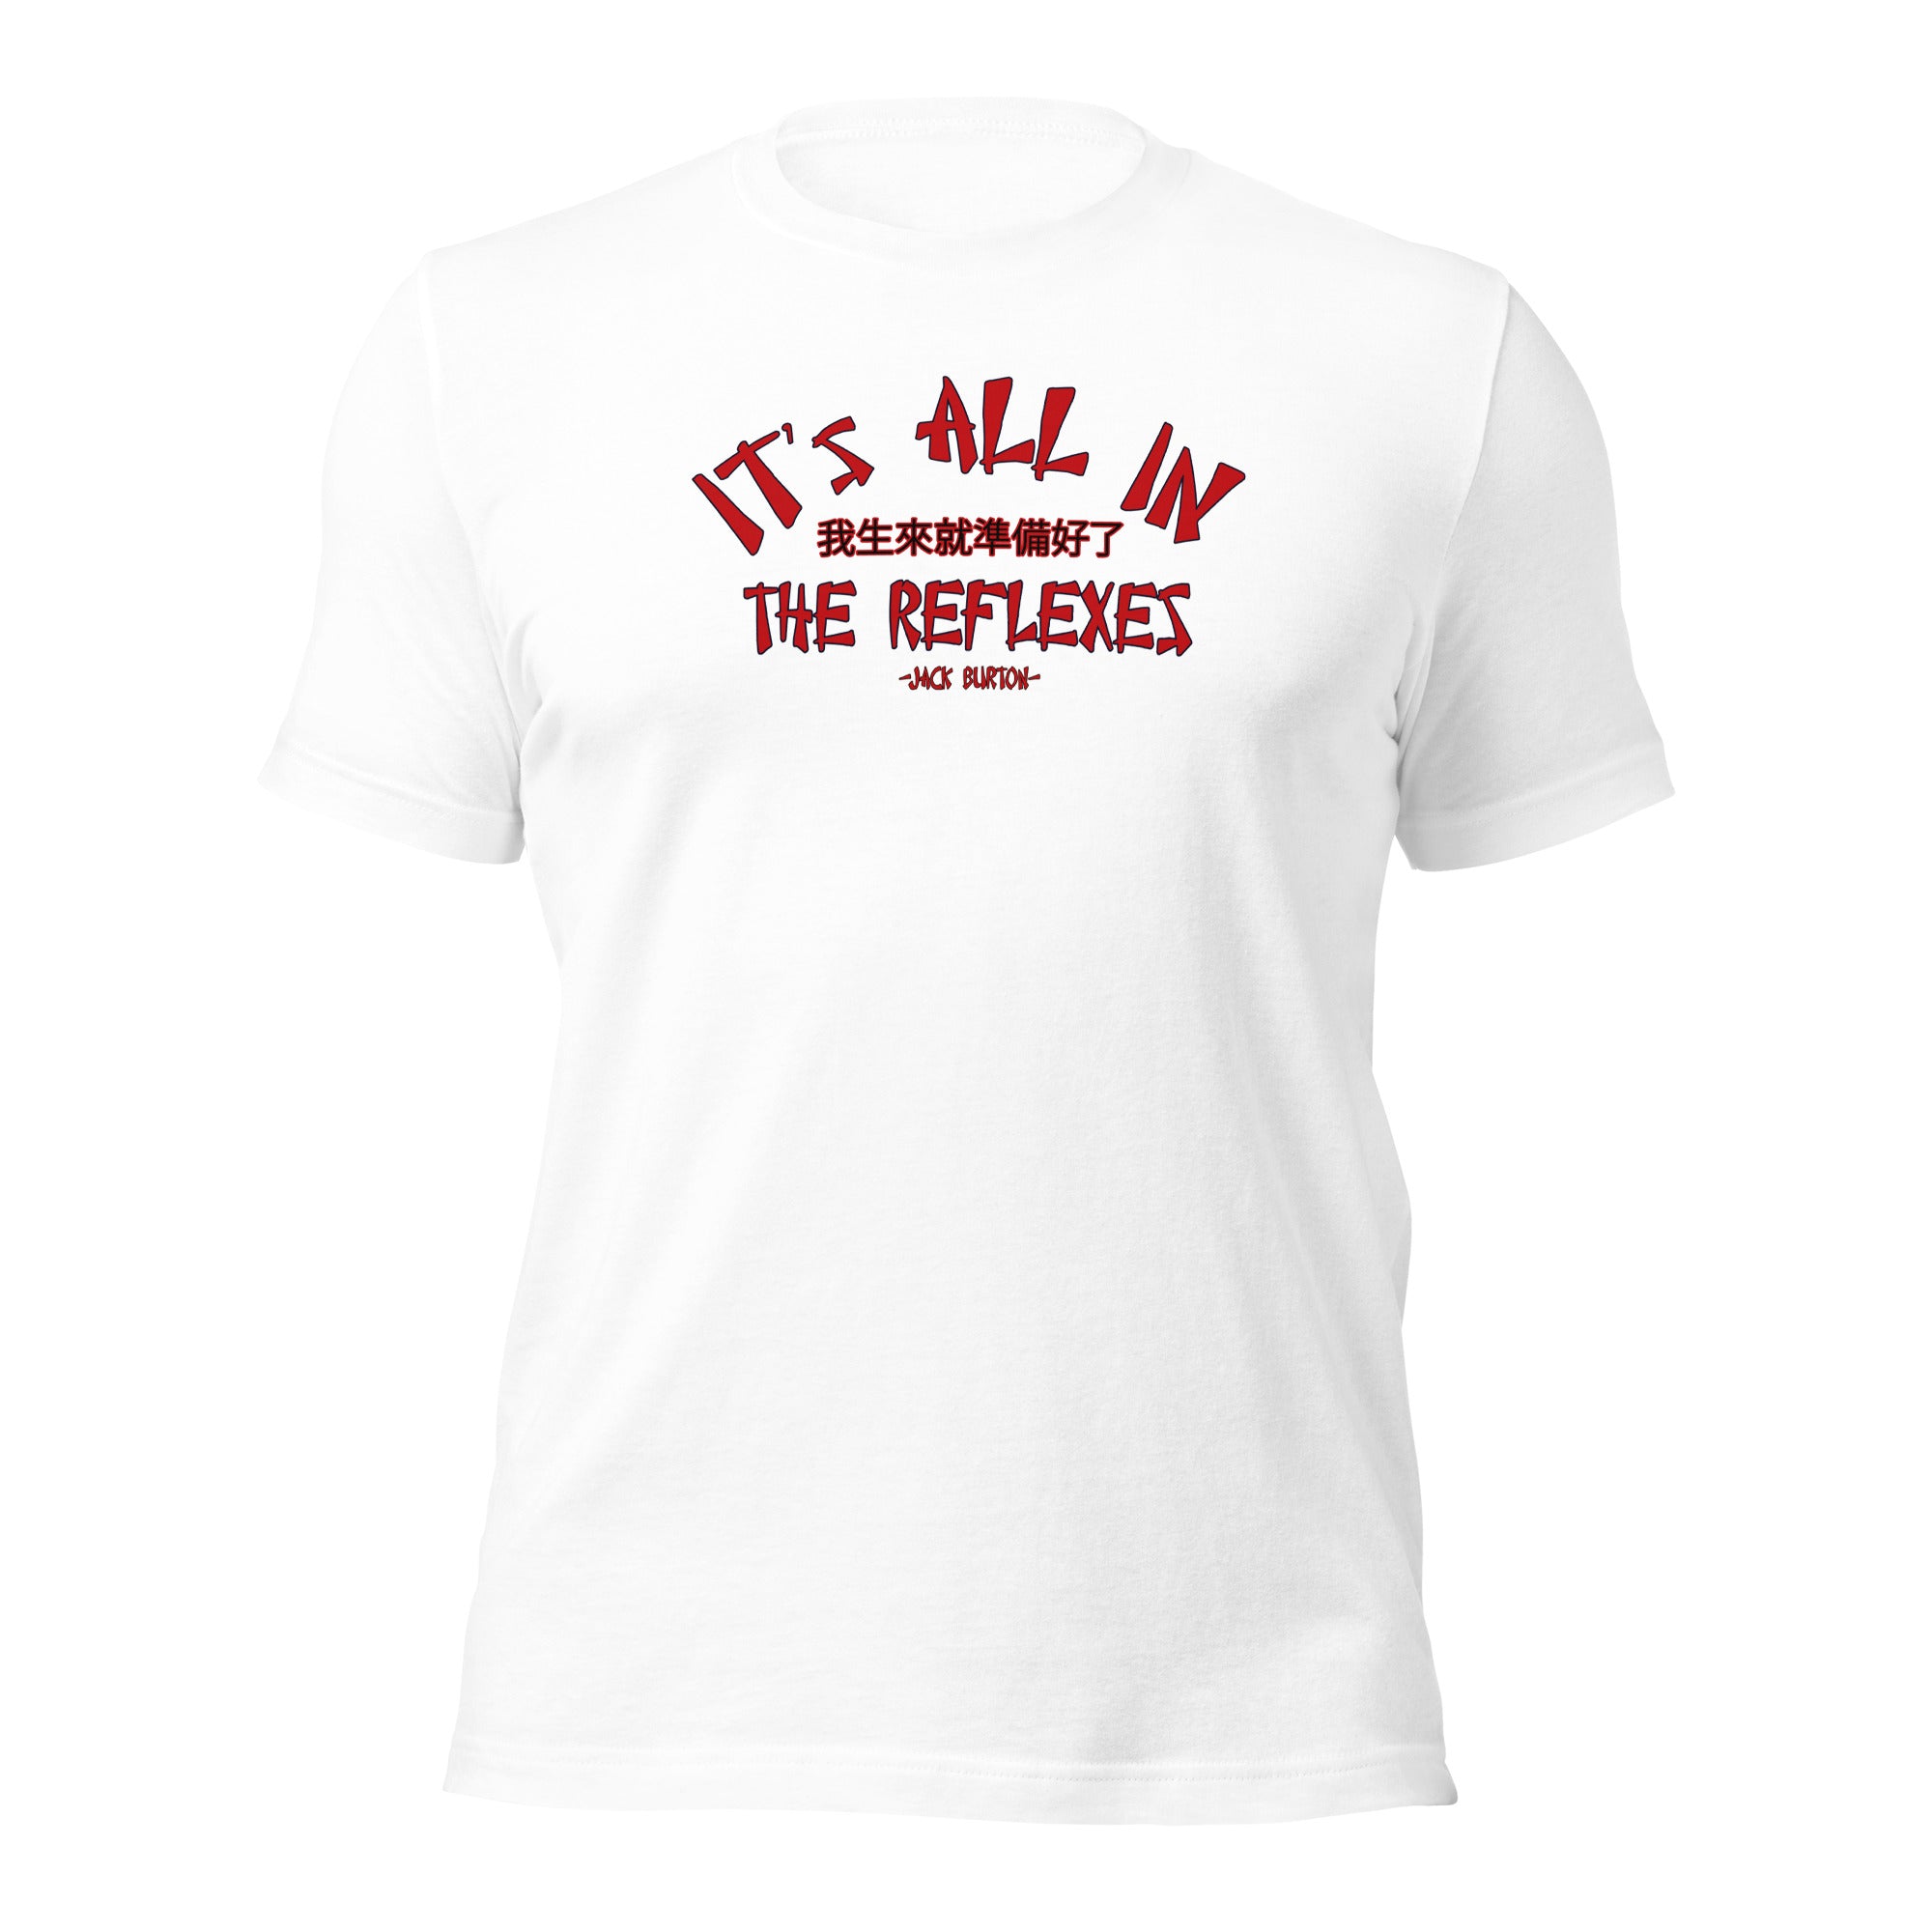 It's All In The Reflexes Unisex t-shirt